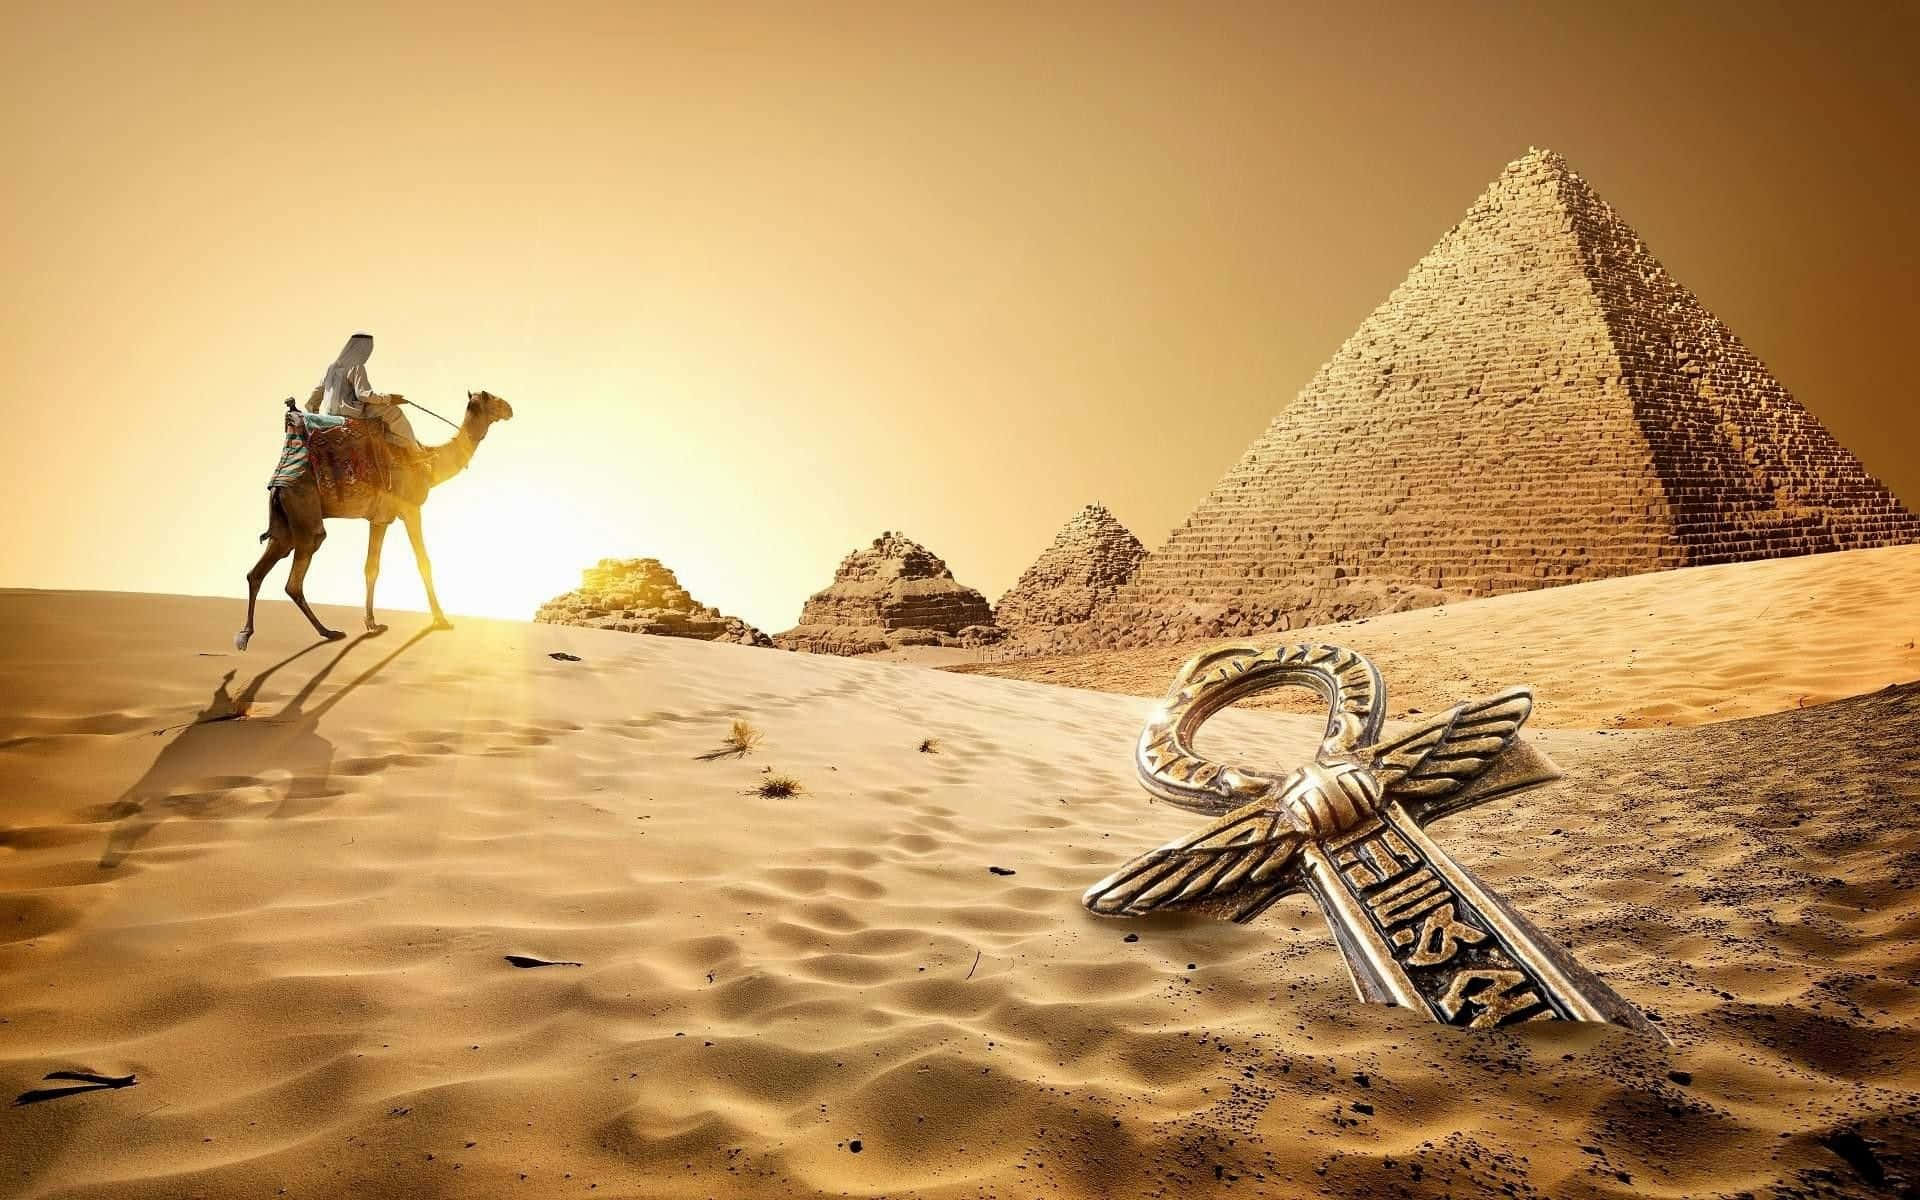 A Camel Is Standing In The Desert With A Pyramid In The Background